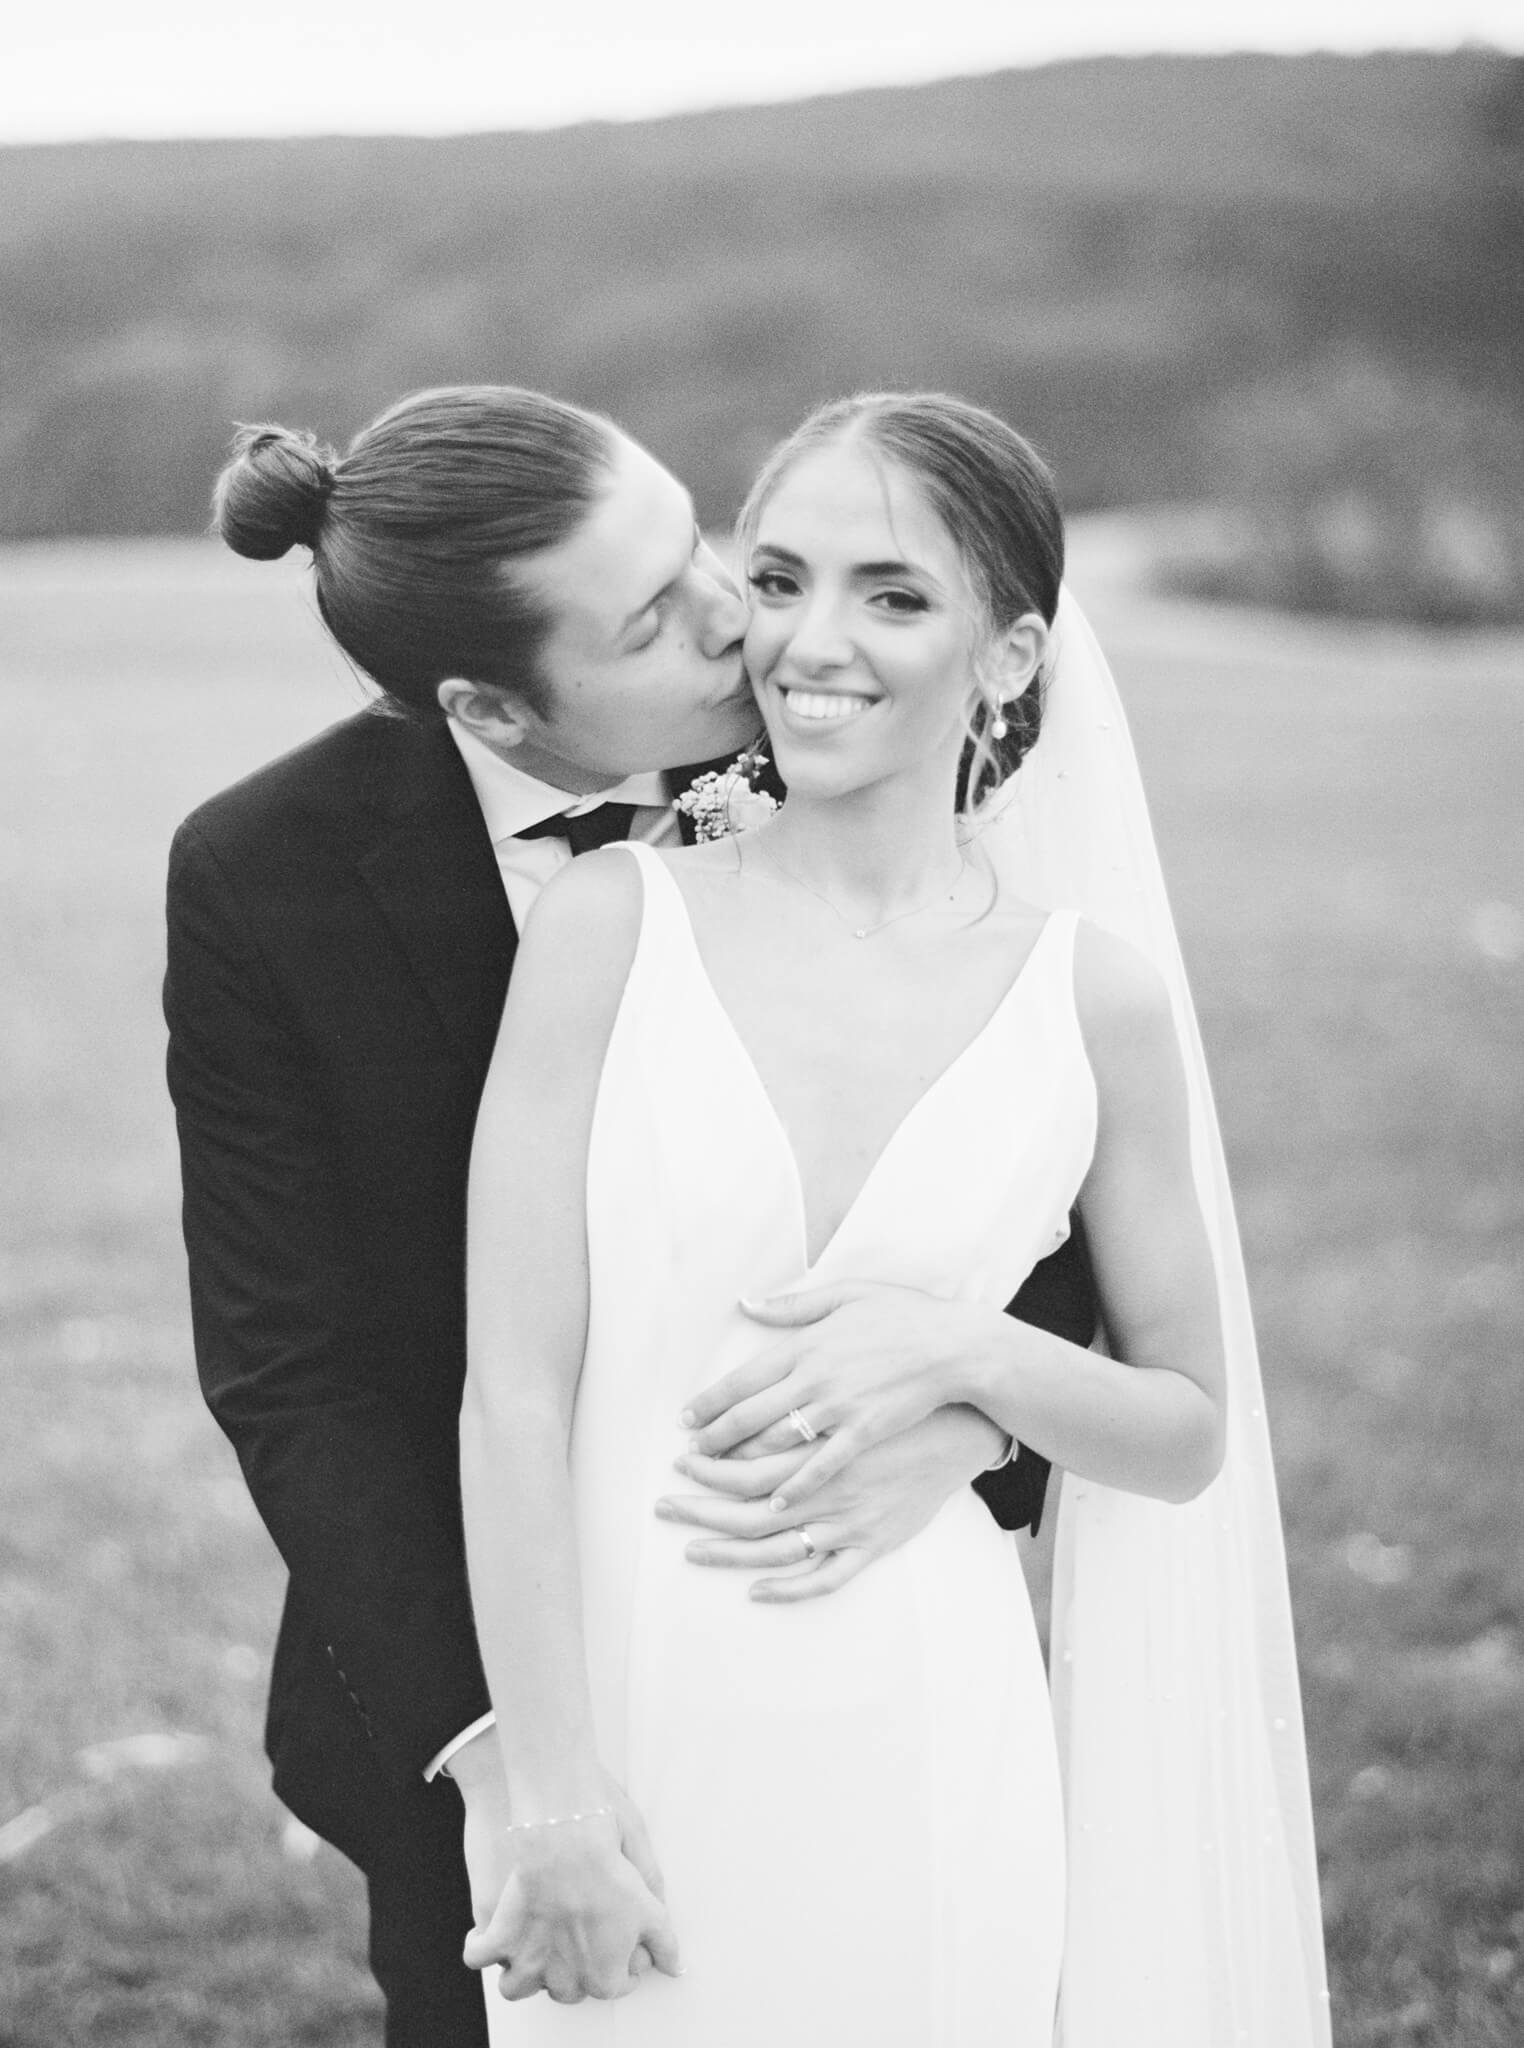 Black and white image of a groom kissing his bride on the cheek while she looks at the camera.